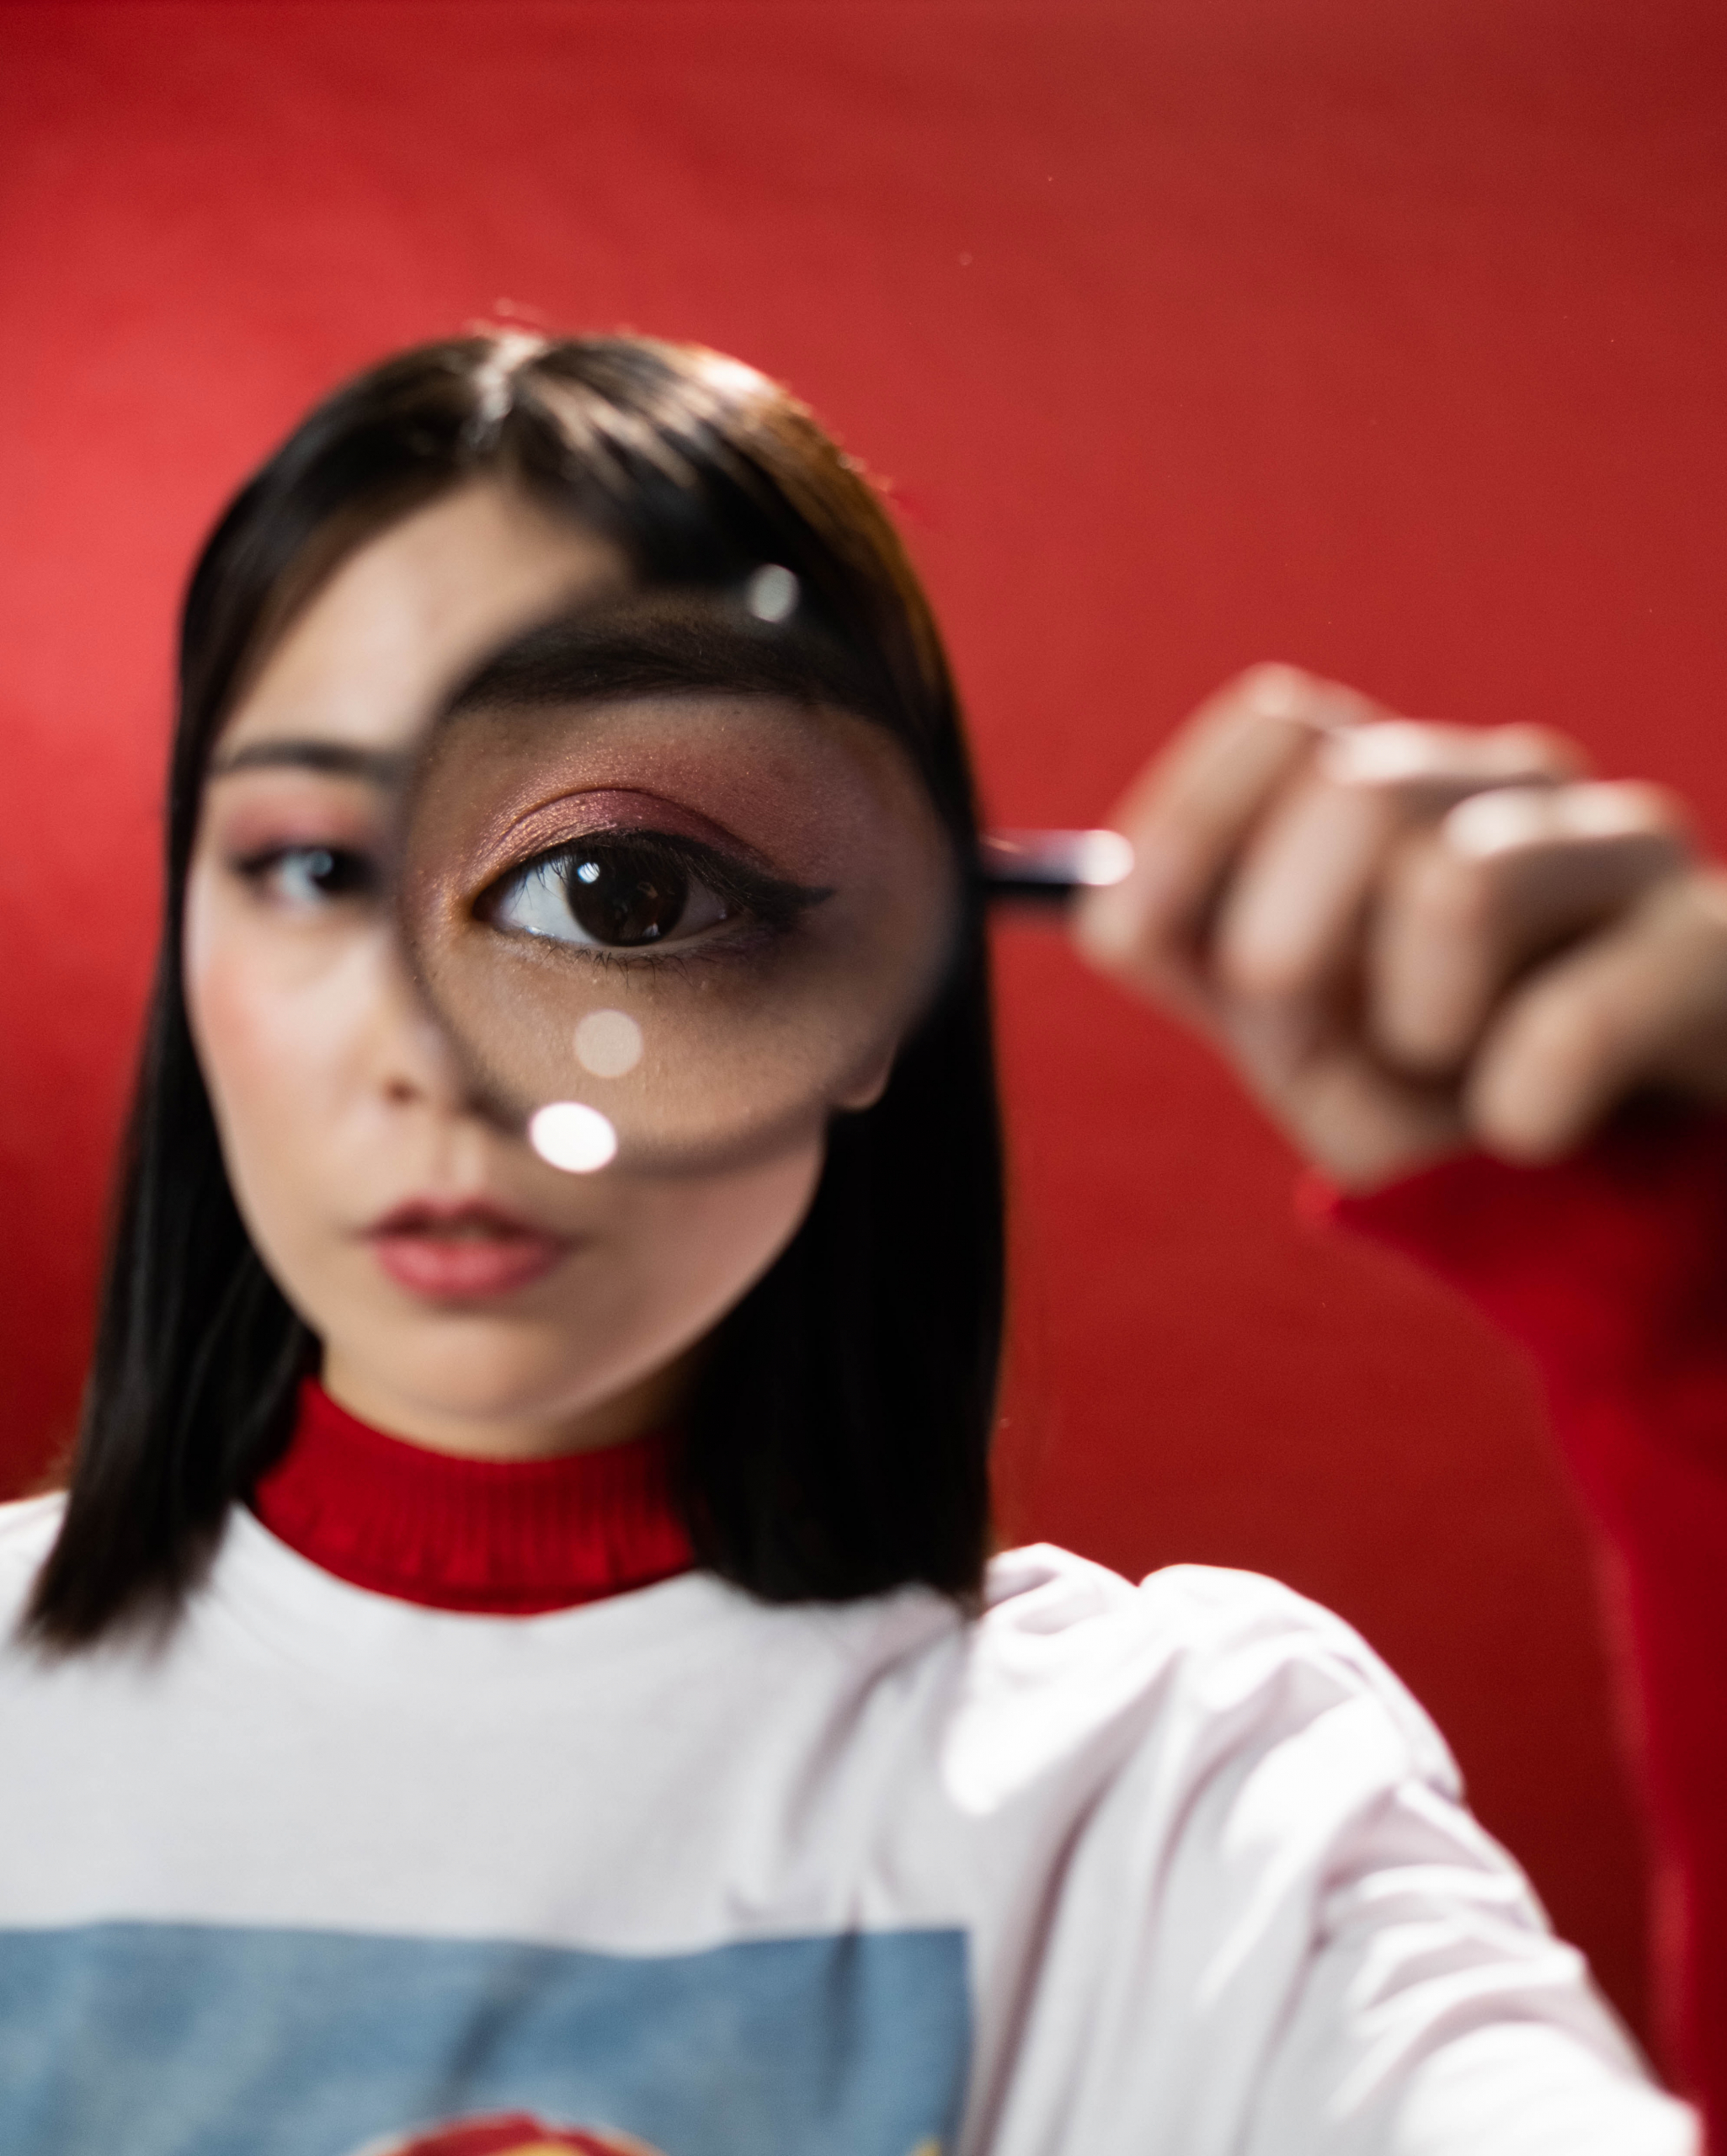 woman with magnifiying glass in front of eye